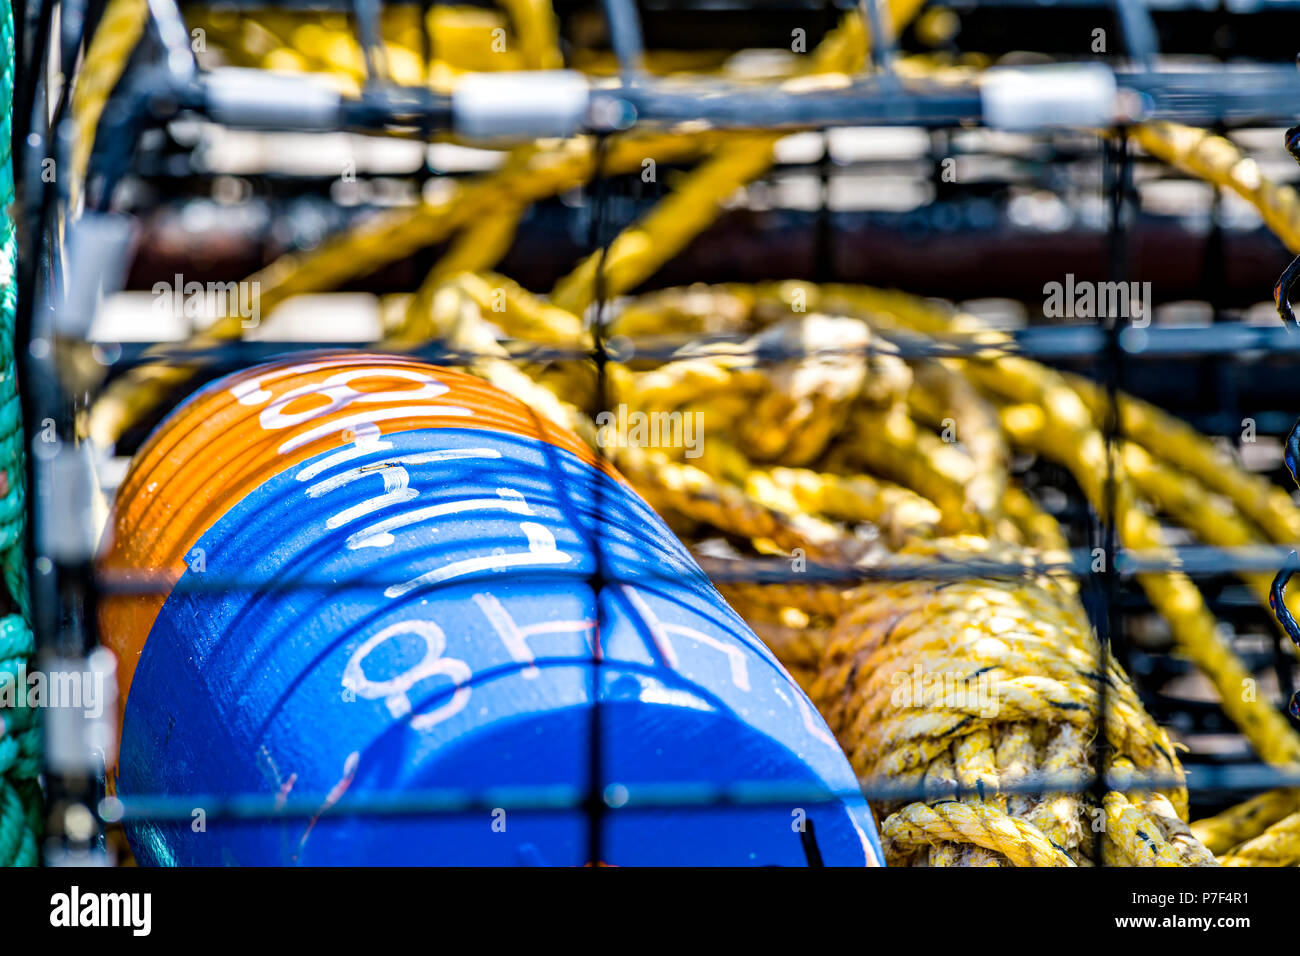 Crab pot fishing gear with yellow coiled polypropylene rope and buoys waiting to be launched into the ocean to catch seafood. Stock Photo